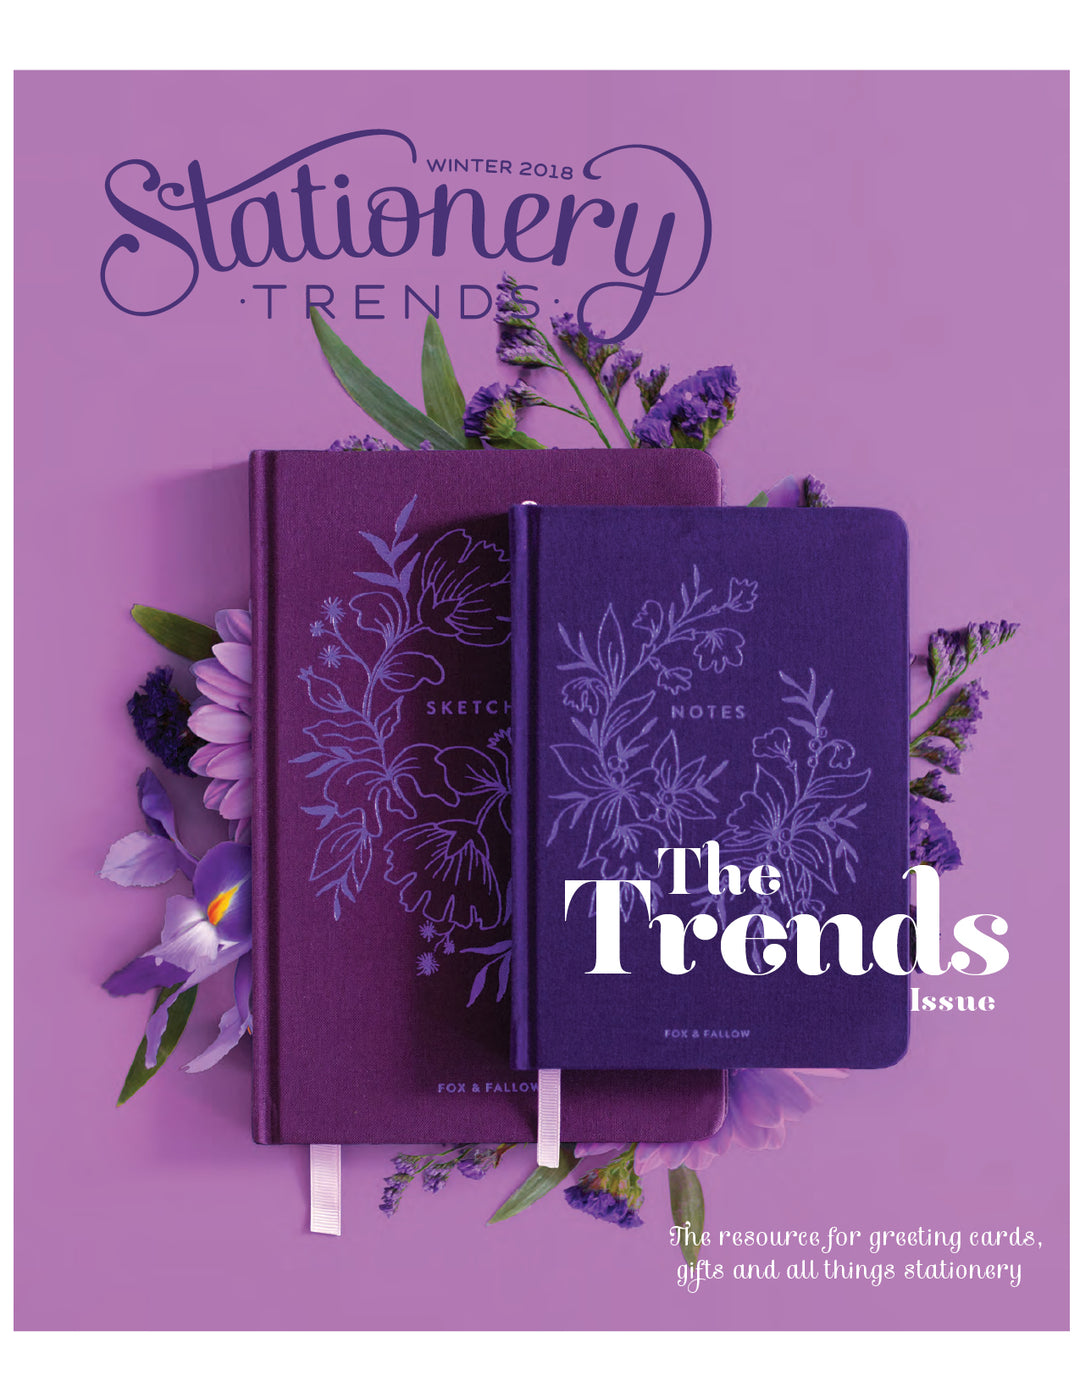 Stationery Trends: Winter 2017